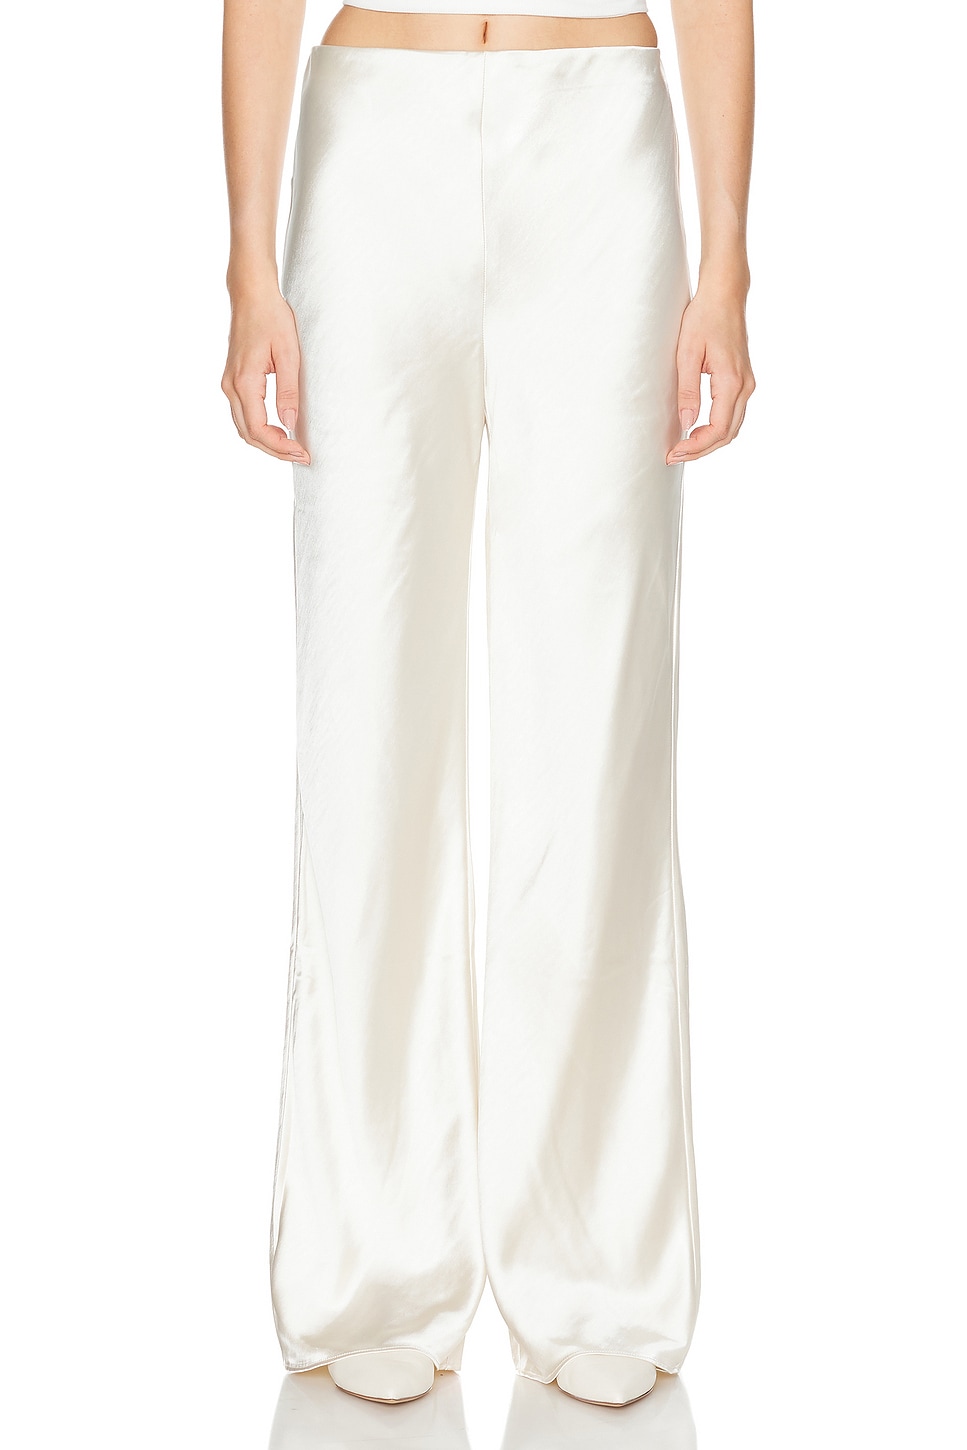 Image 1 of L'Academie by Marianna Etienne Pant in Ivory